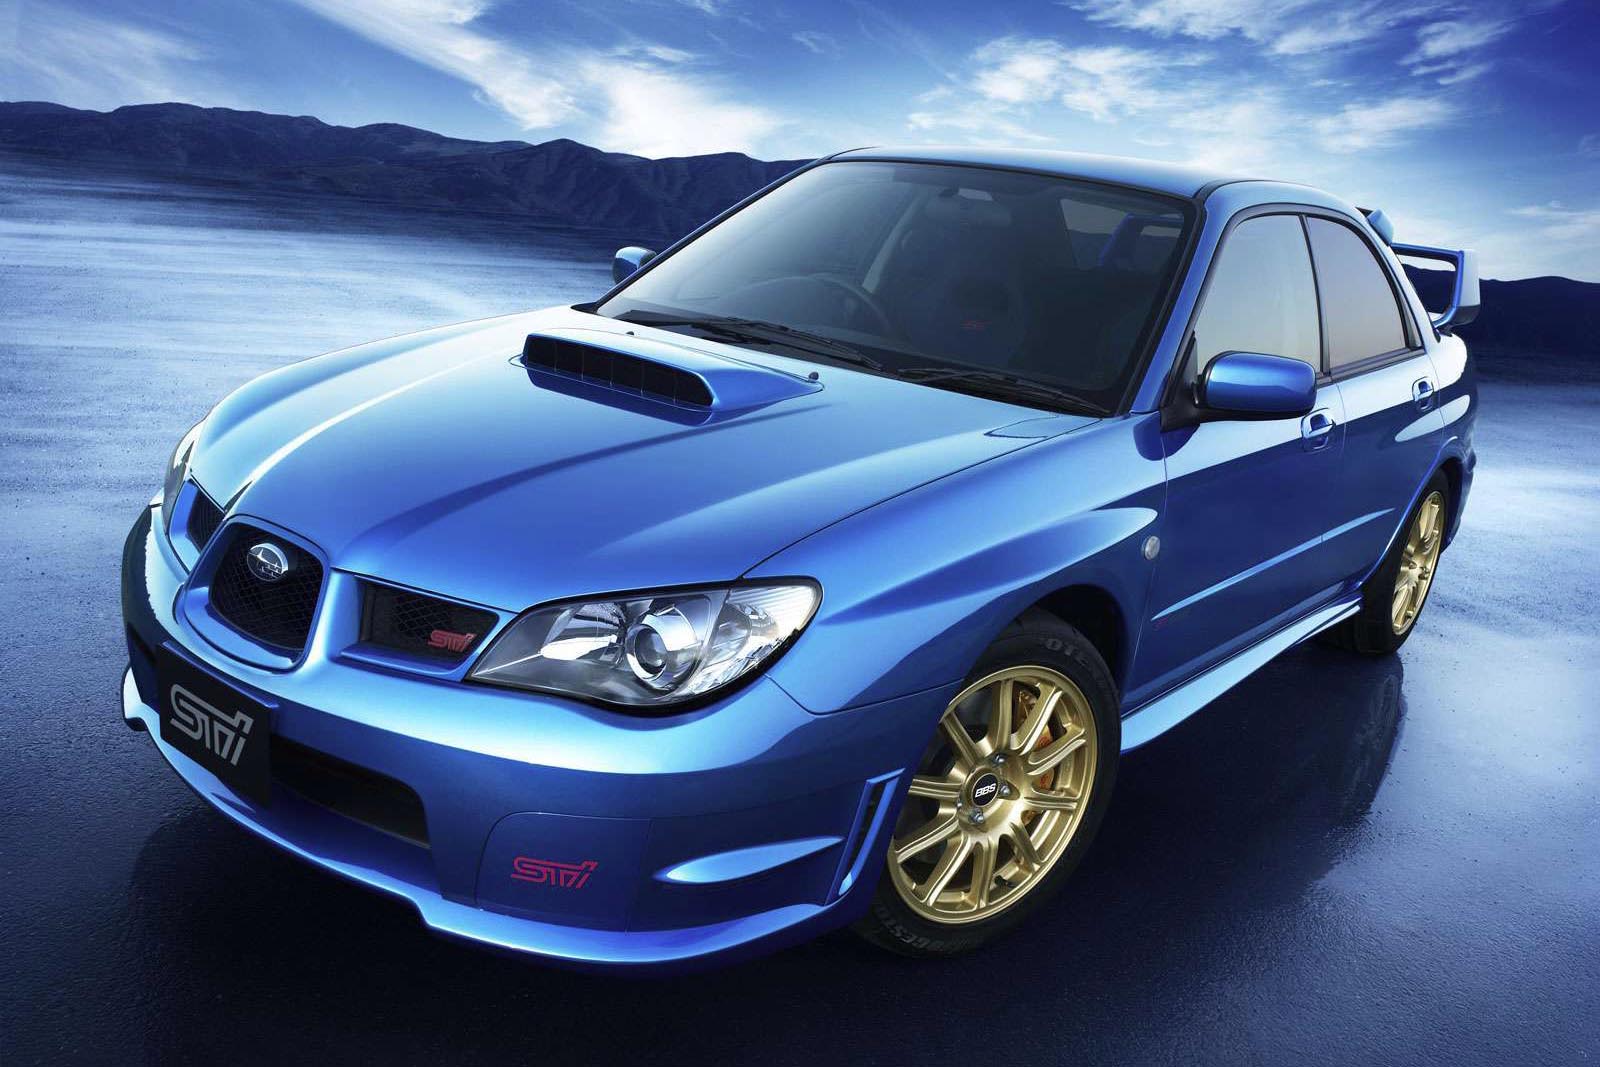 Nothing says practical speed like a Subaru WRX. You've got your all-wheel-drive for poor weather conditions, your four doors for schlepping around the kids, a usefully-sized trunk for cargo duty, and decent visibility. Also, giant wing and hood scoop. Because racecar.